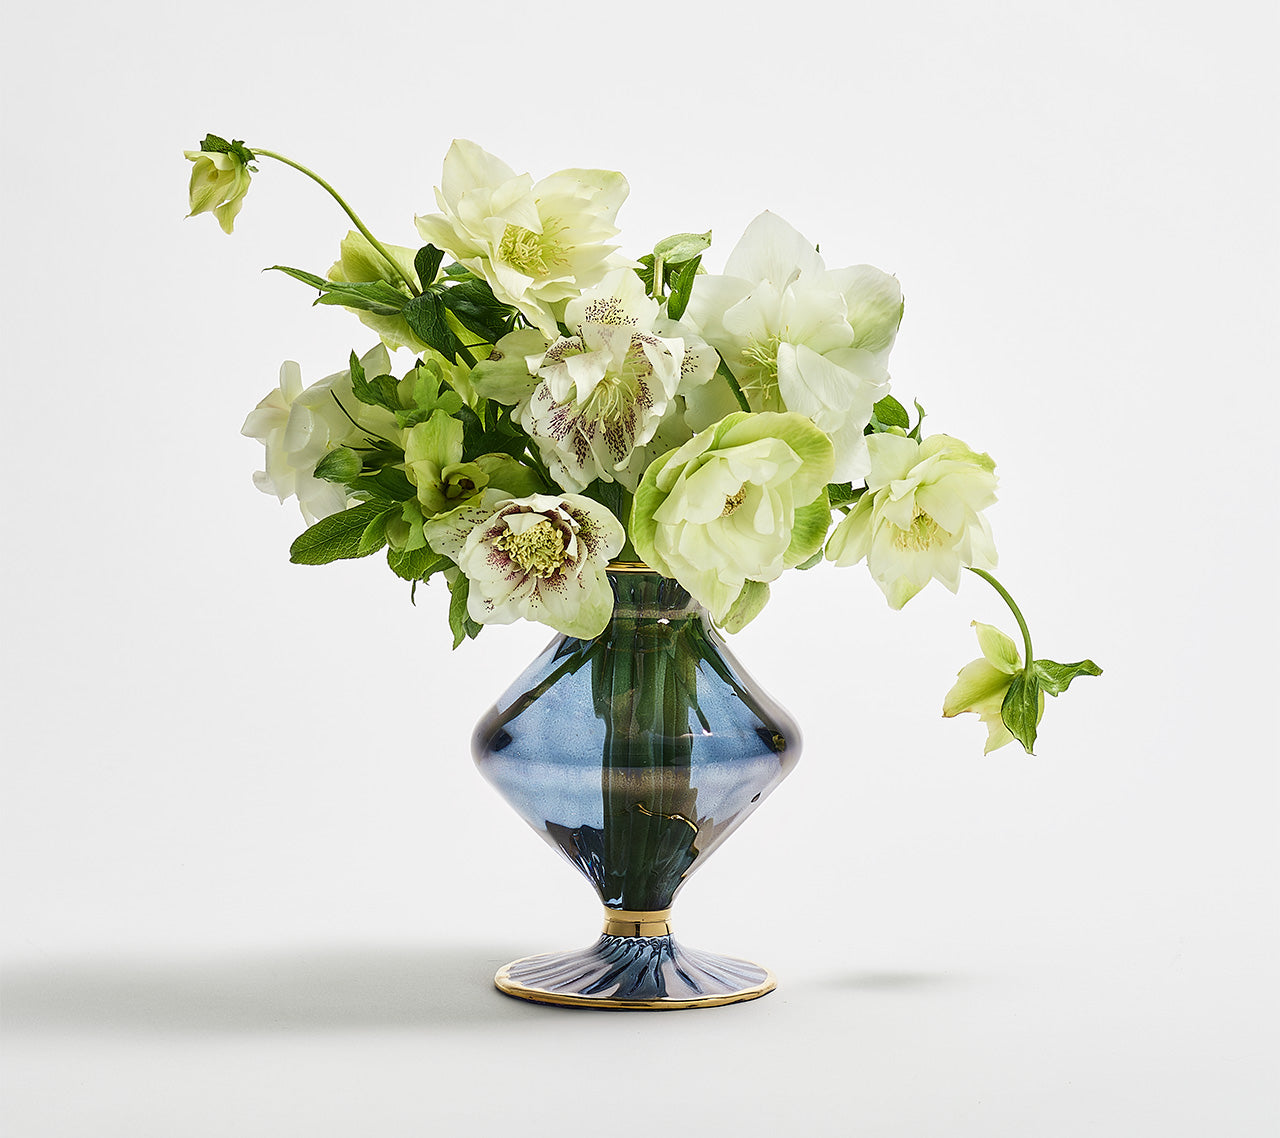 Scallop Bud Vase in Blue